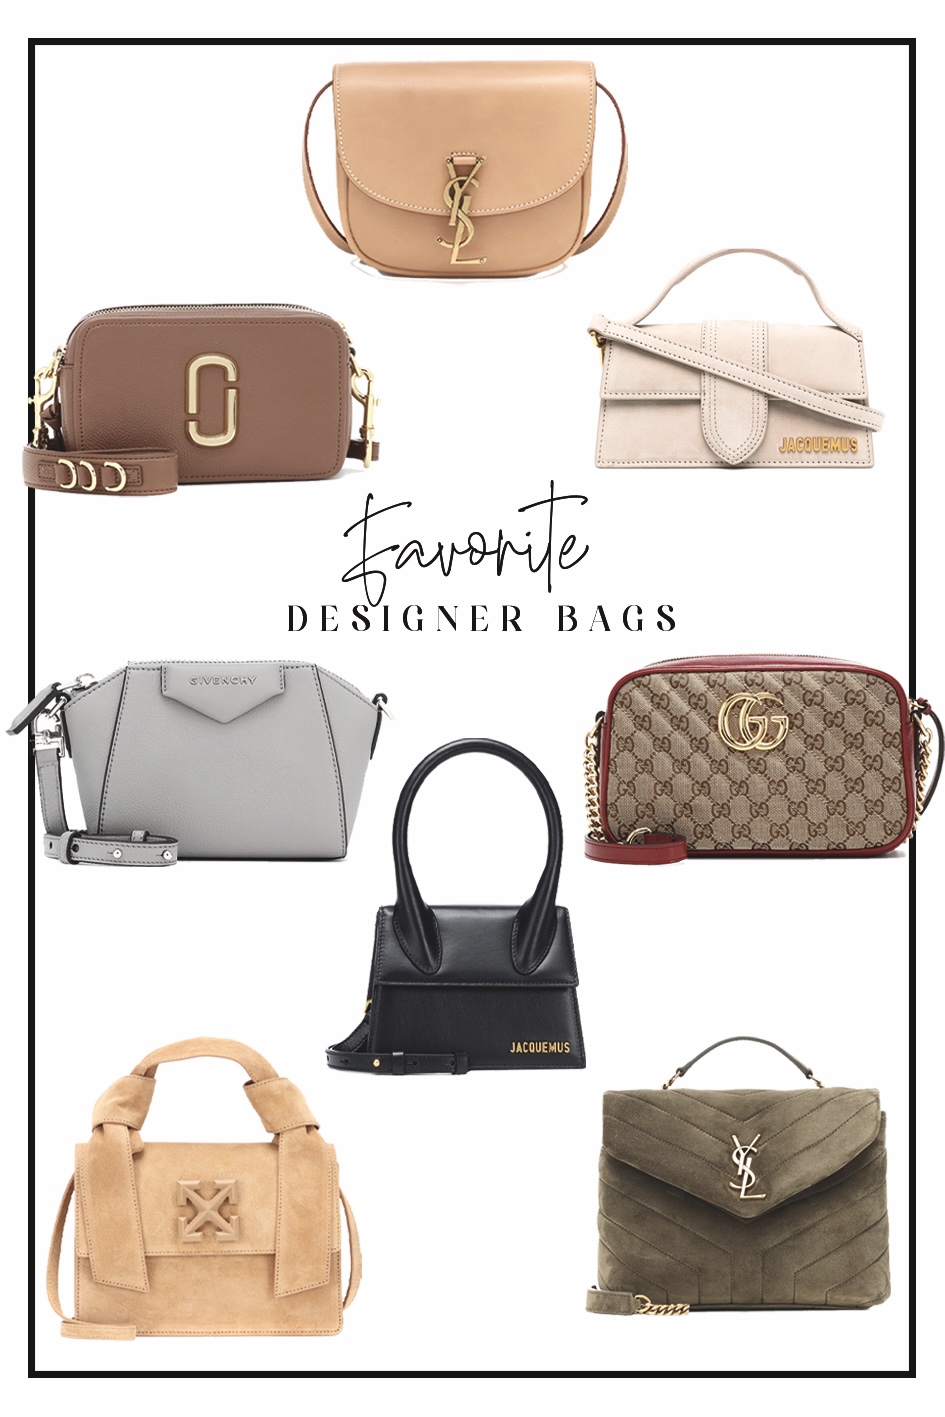 I could talk about designer handbags all day